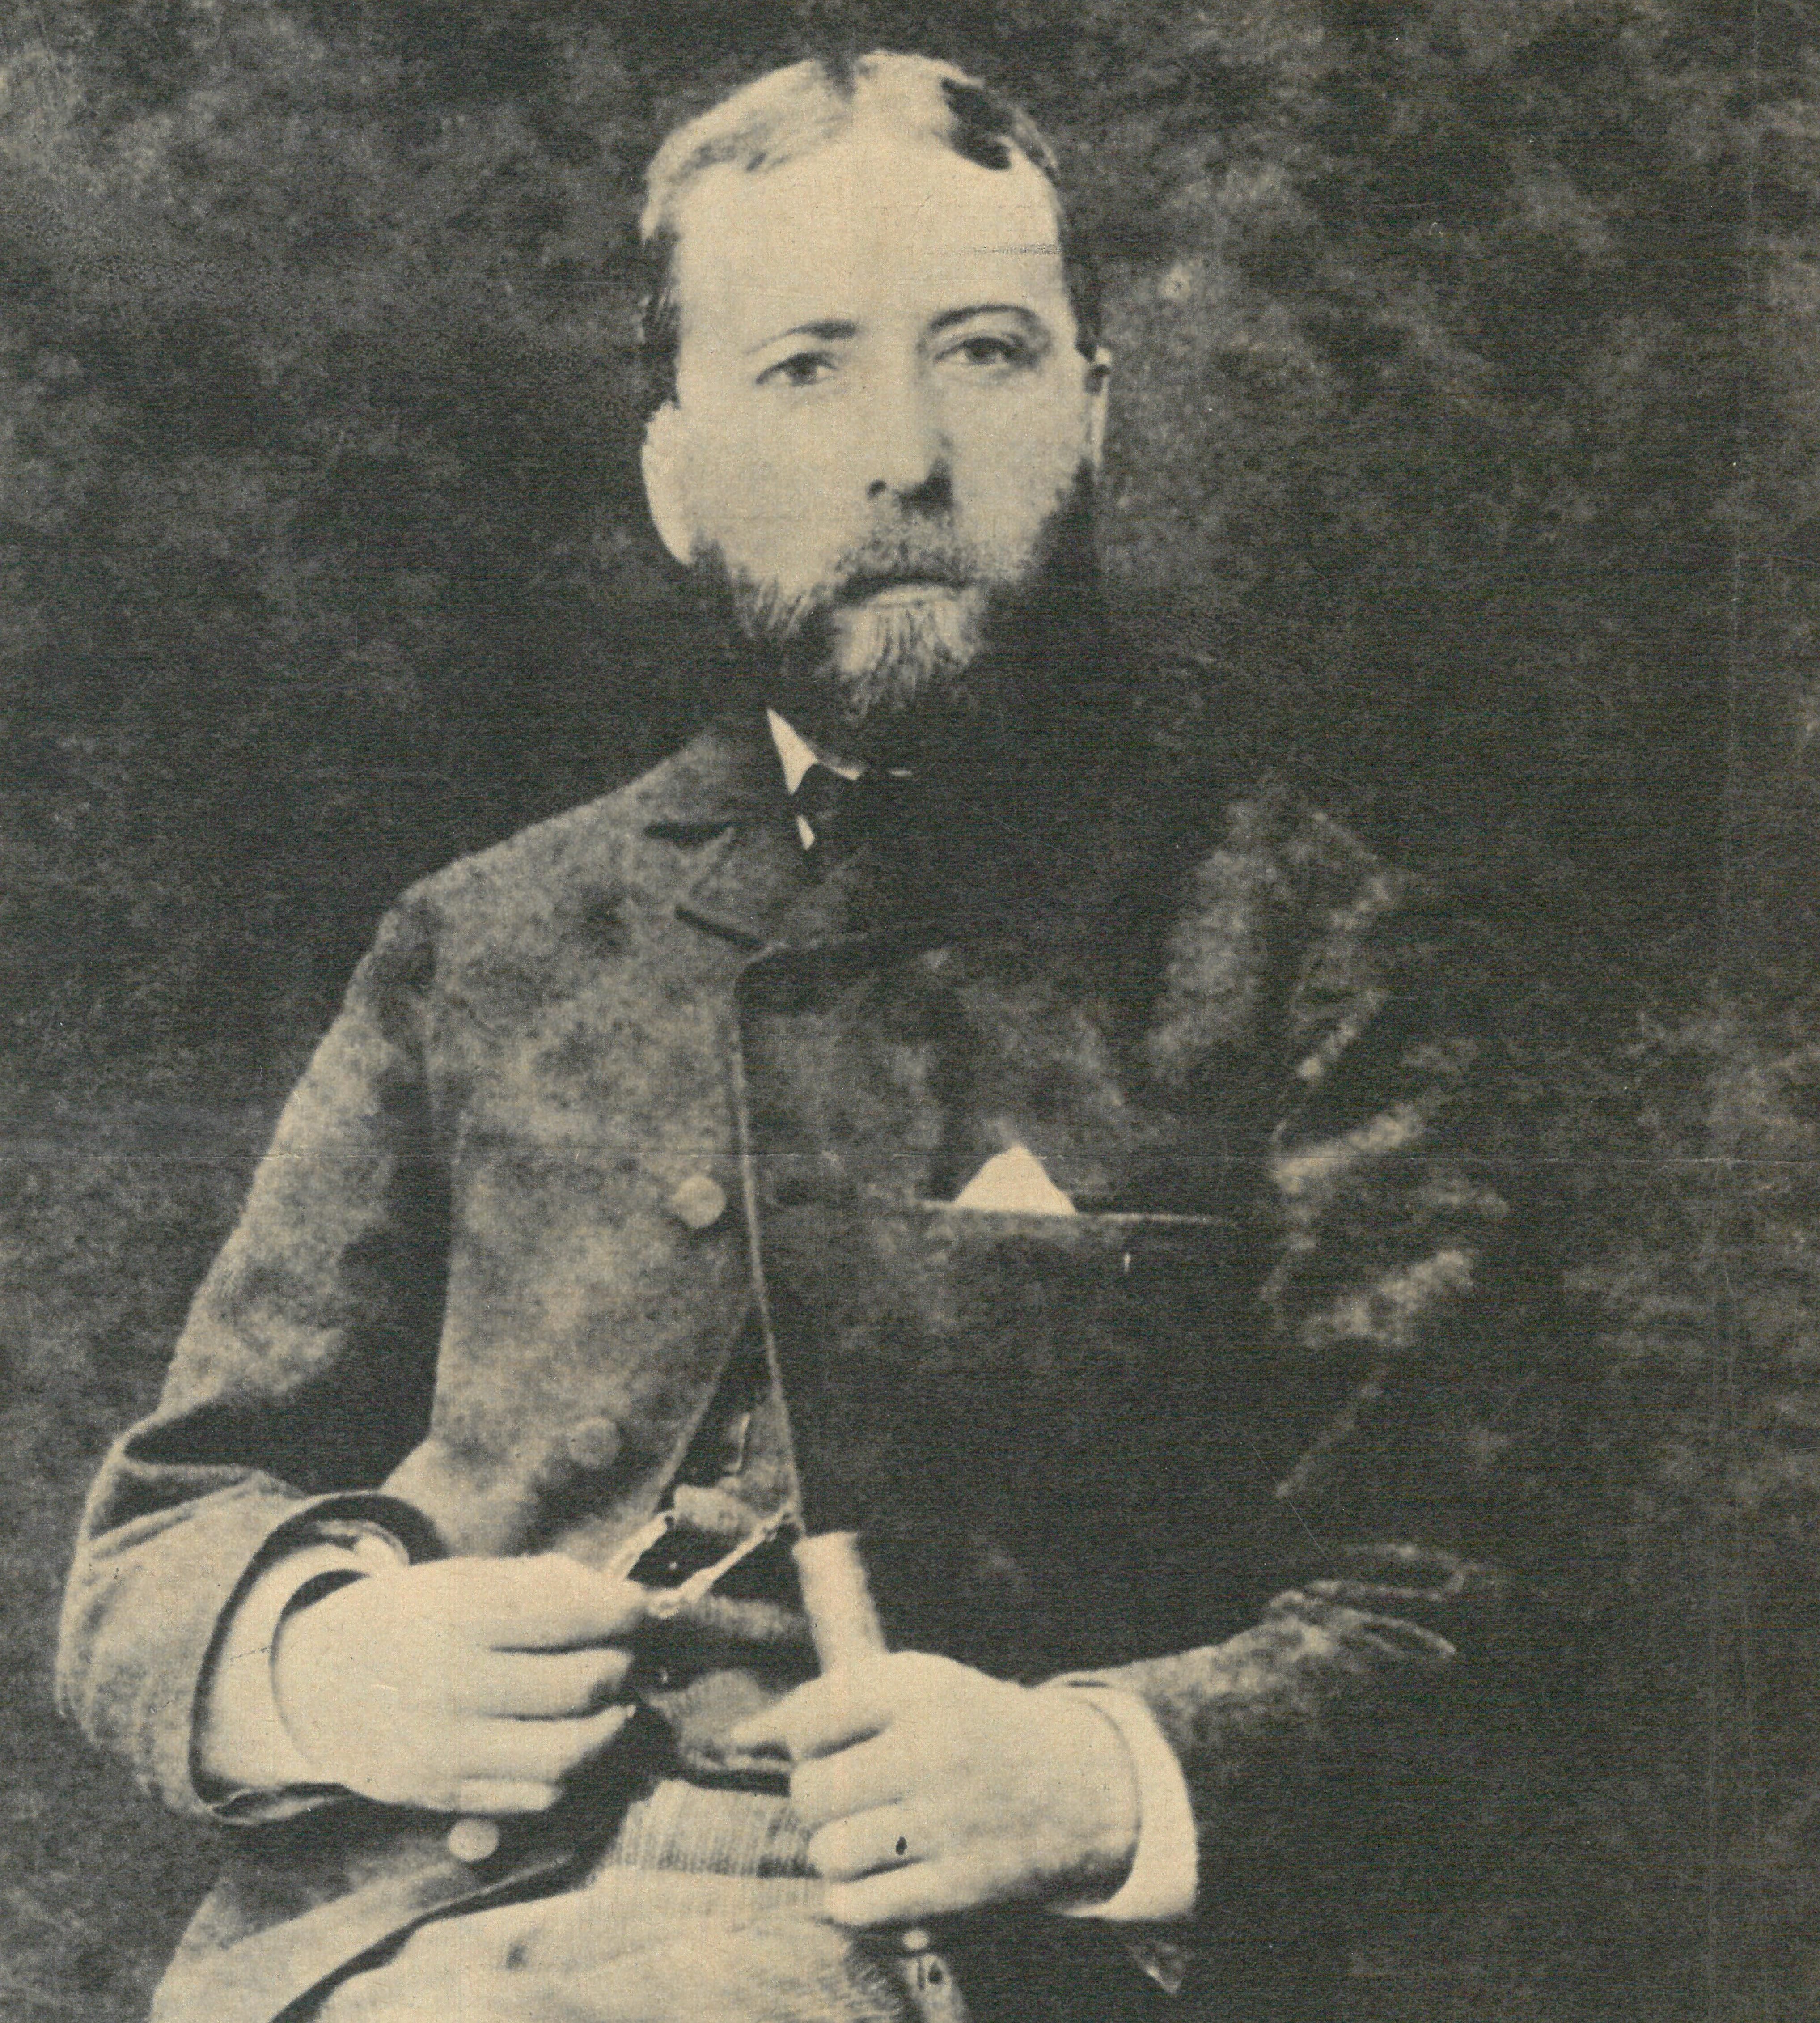 Marthinus Paulus Bloemkolk shortly after his arrival in the Hoeko Valley. Image: Supplied by the author